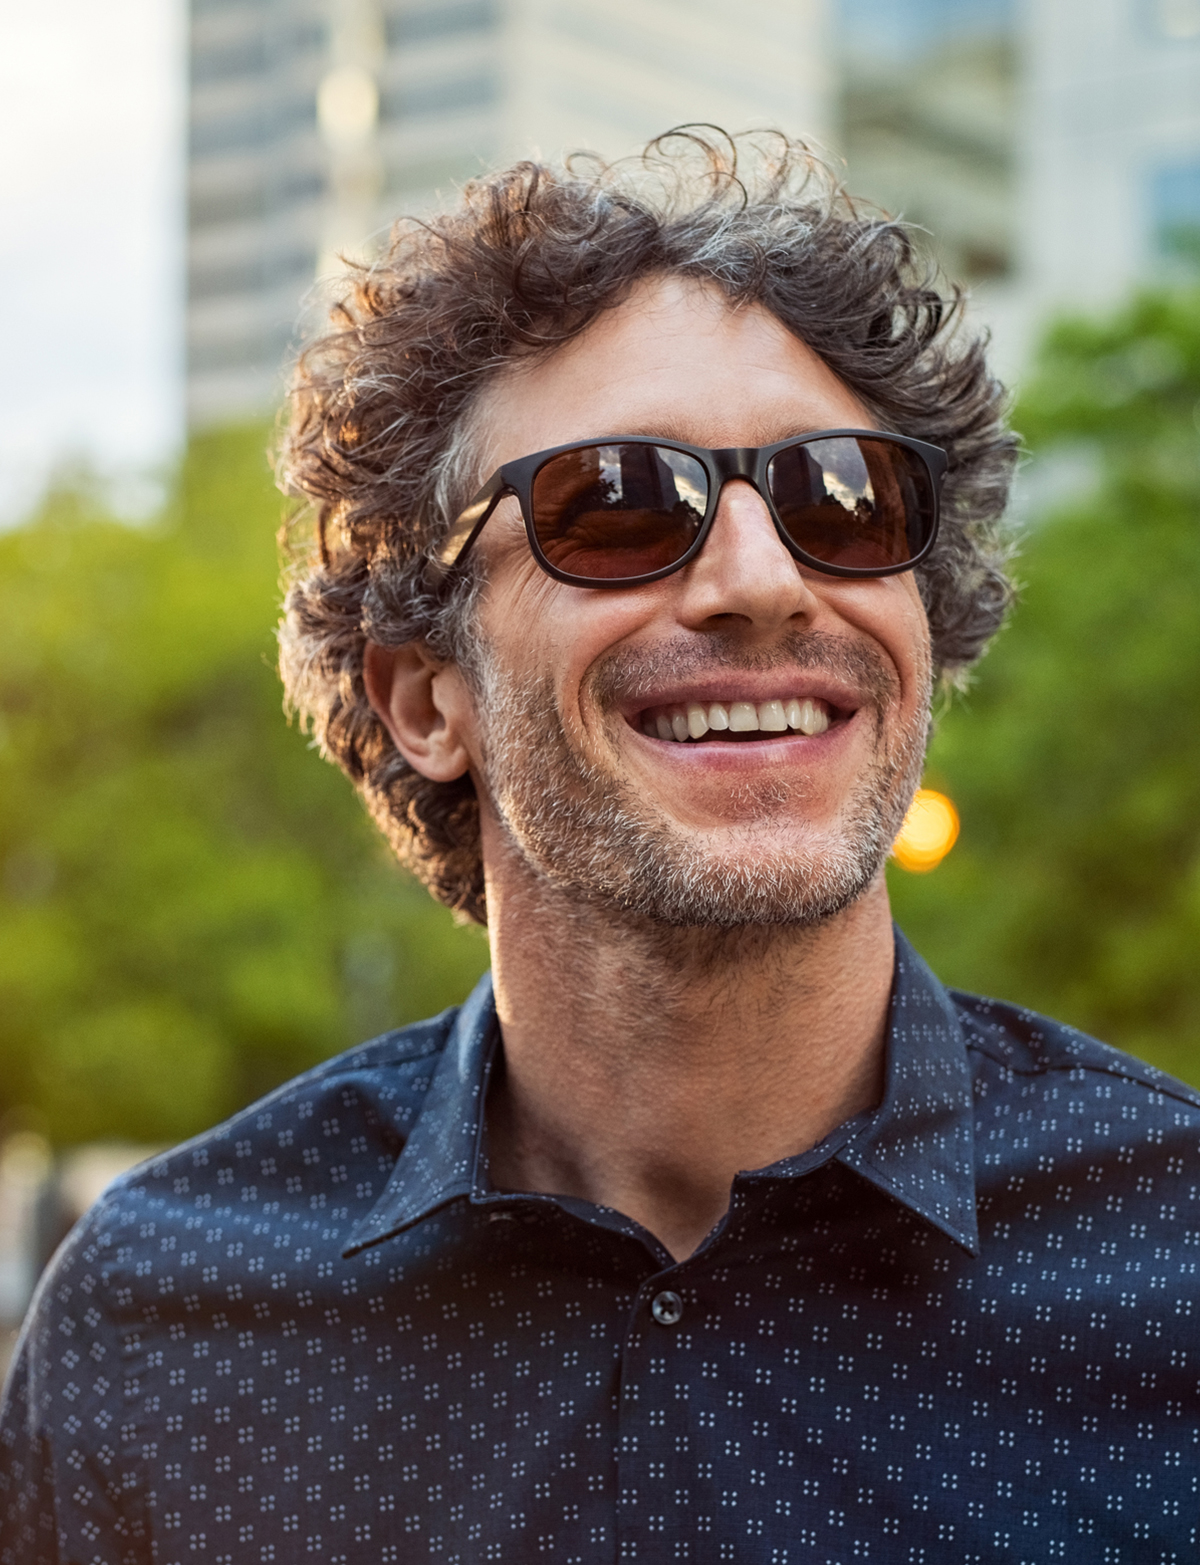 Man Smiling With Sun Glasses